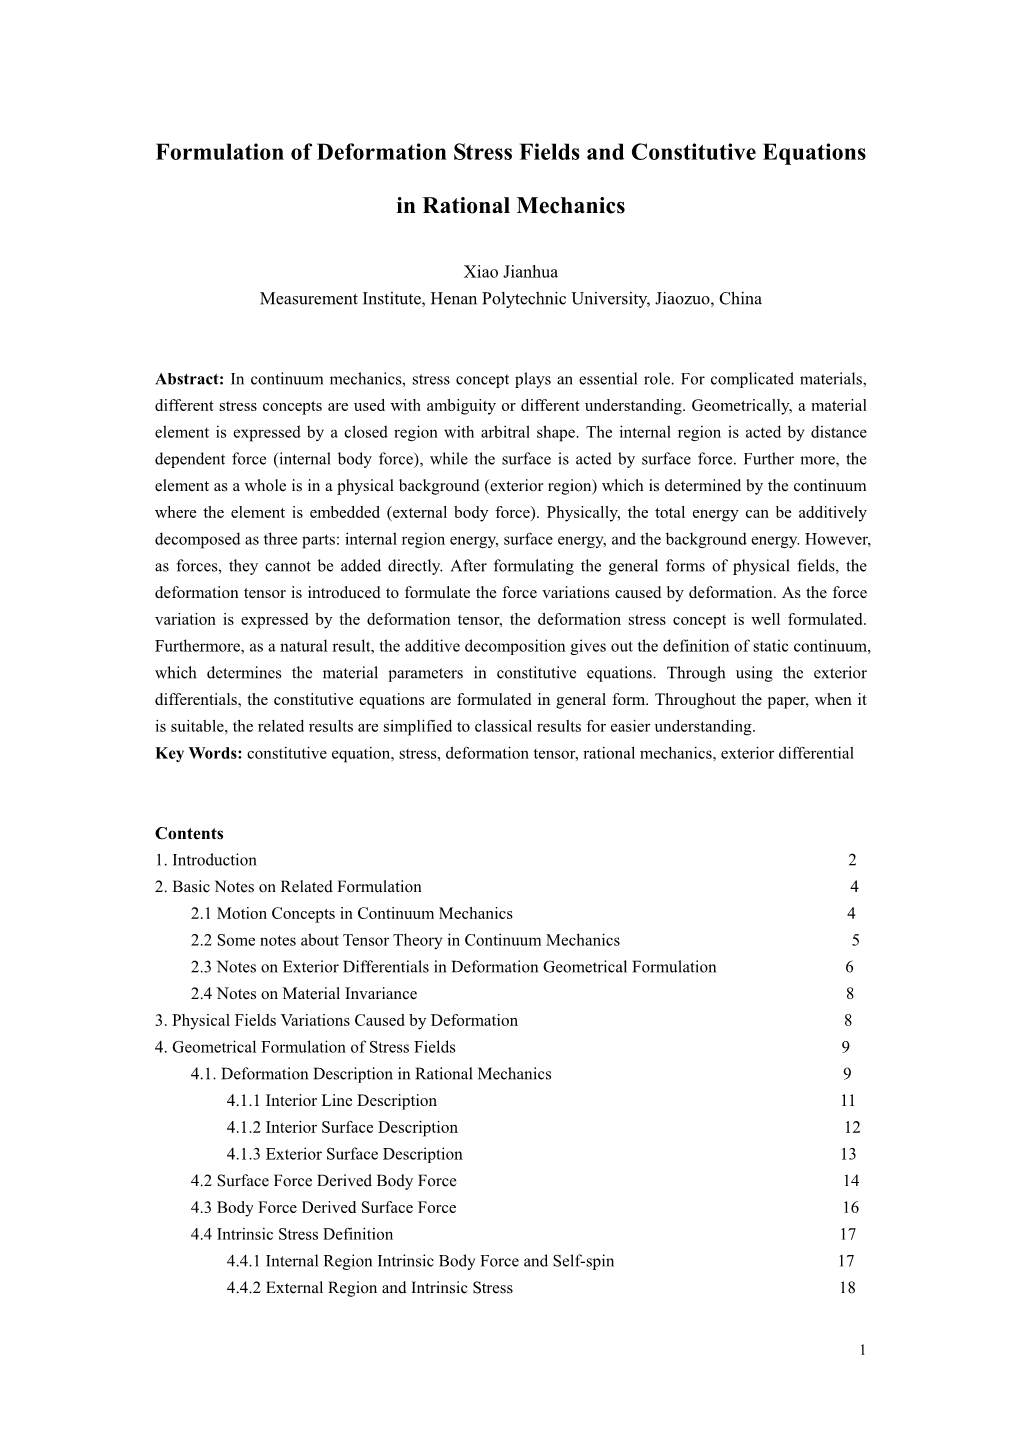 Formulation of Deformation Stress Fields and Constitutive Equations In